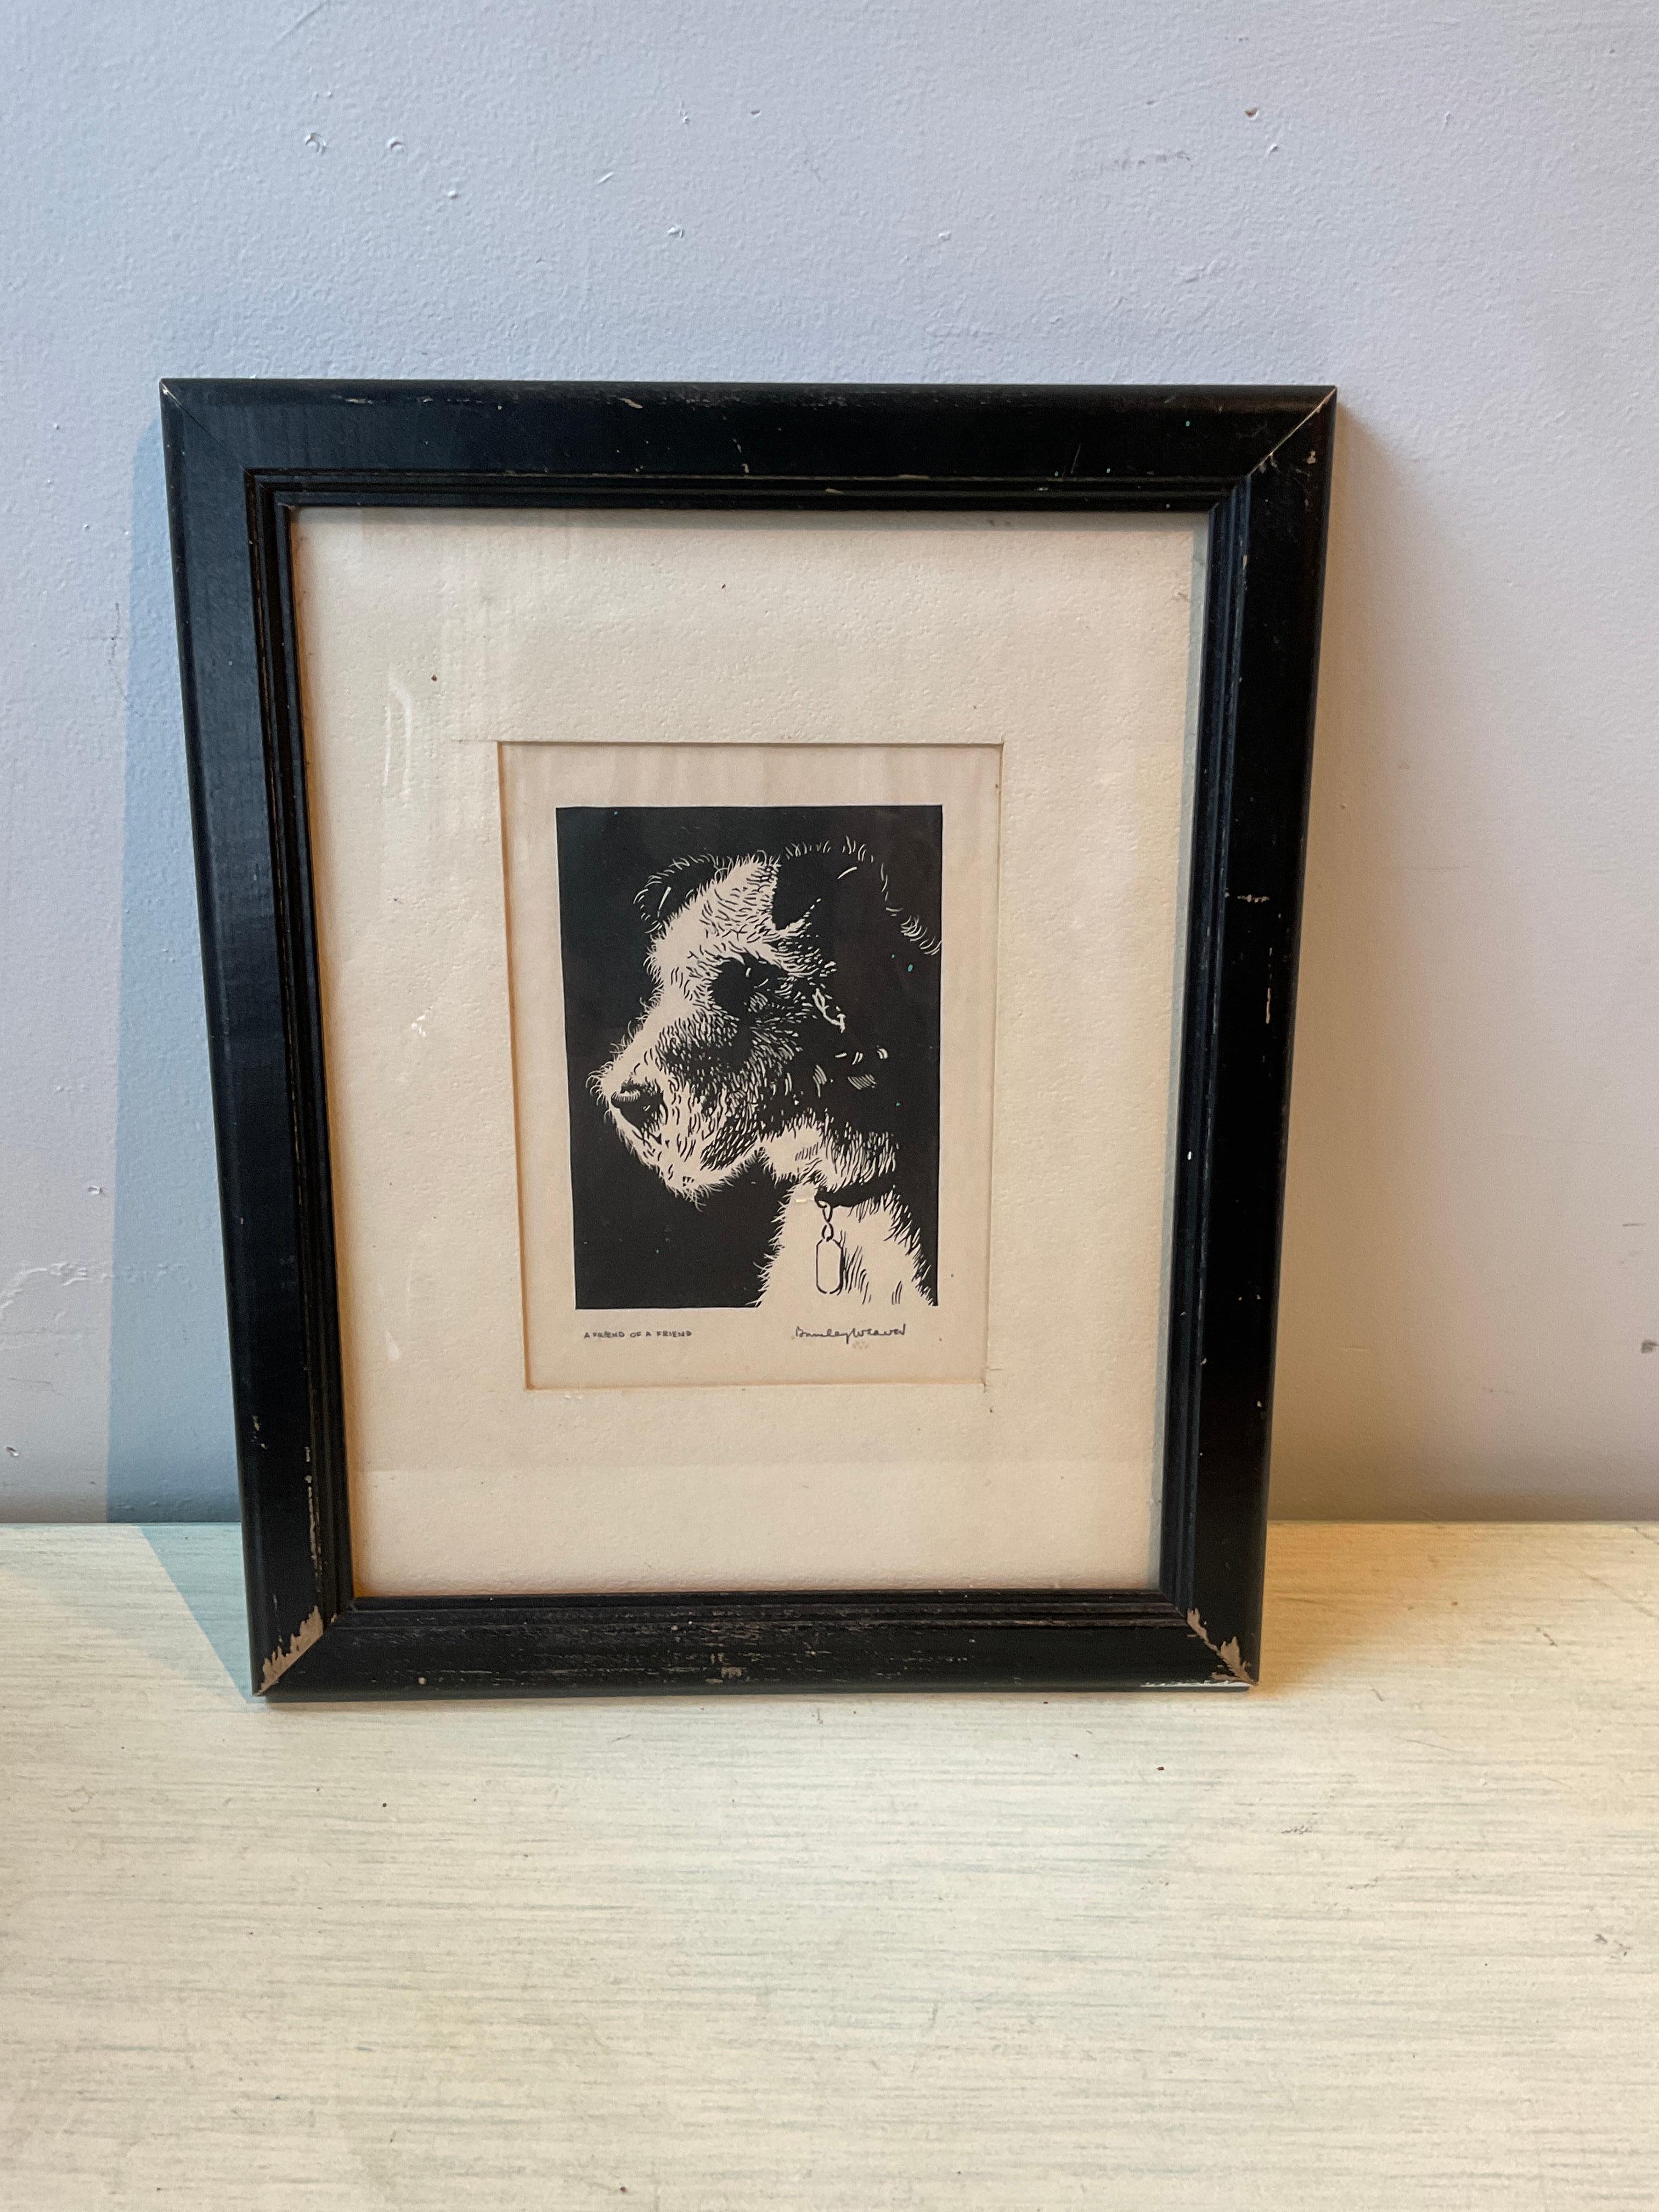 1940s linoleum block print of a wire fox terrier by Burnley Weaver. White paint on one corner of frame.